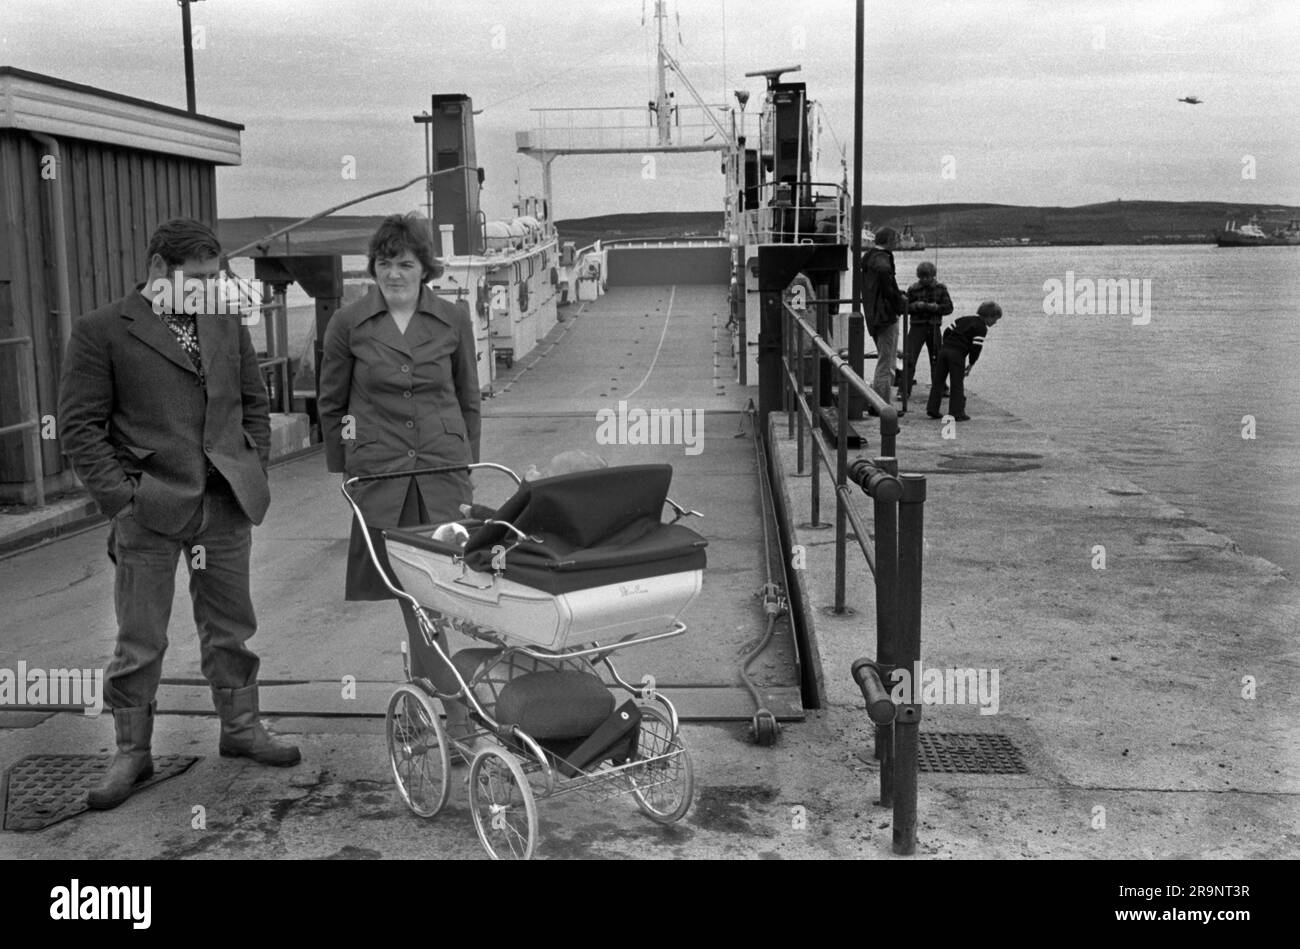 Couple with baby in pram, waiting for the roll on roll off ferry to Bressay. Lerwick, Shetlands Mainland, Shetland Islands, Scotland, circa 1979. UK 1970S HOMER SYKES Stock Photo